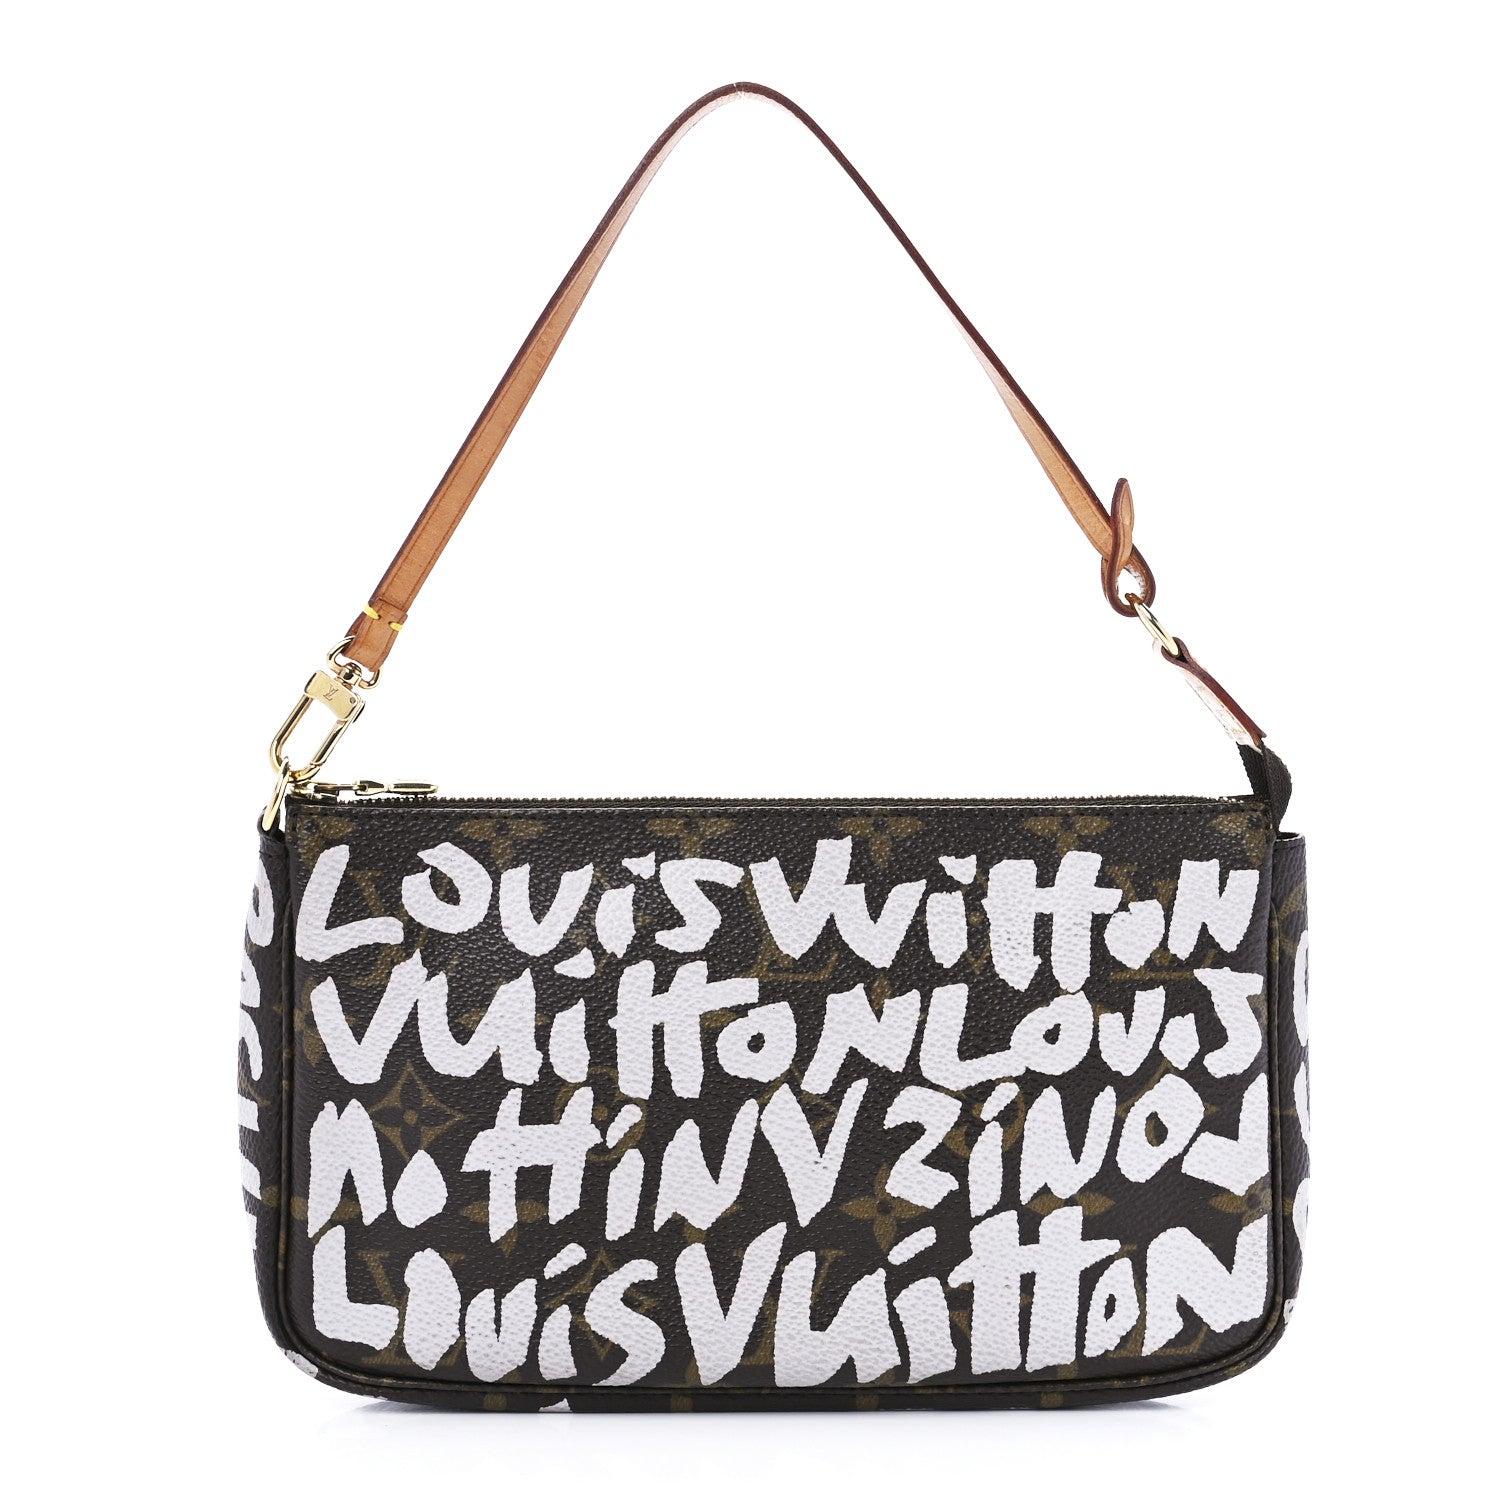 Louis Vuitton x Stephen Sprouse Limited Edition Graffiti Pochette Accessories Bag White - Vault 55 | Authentic Preowned Luxury